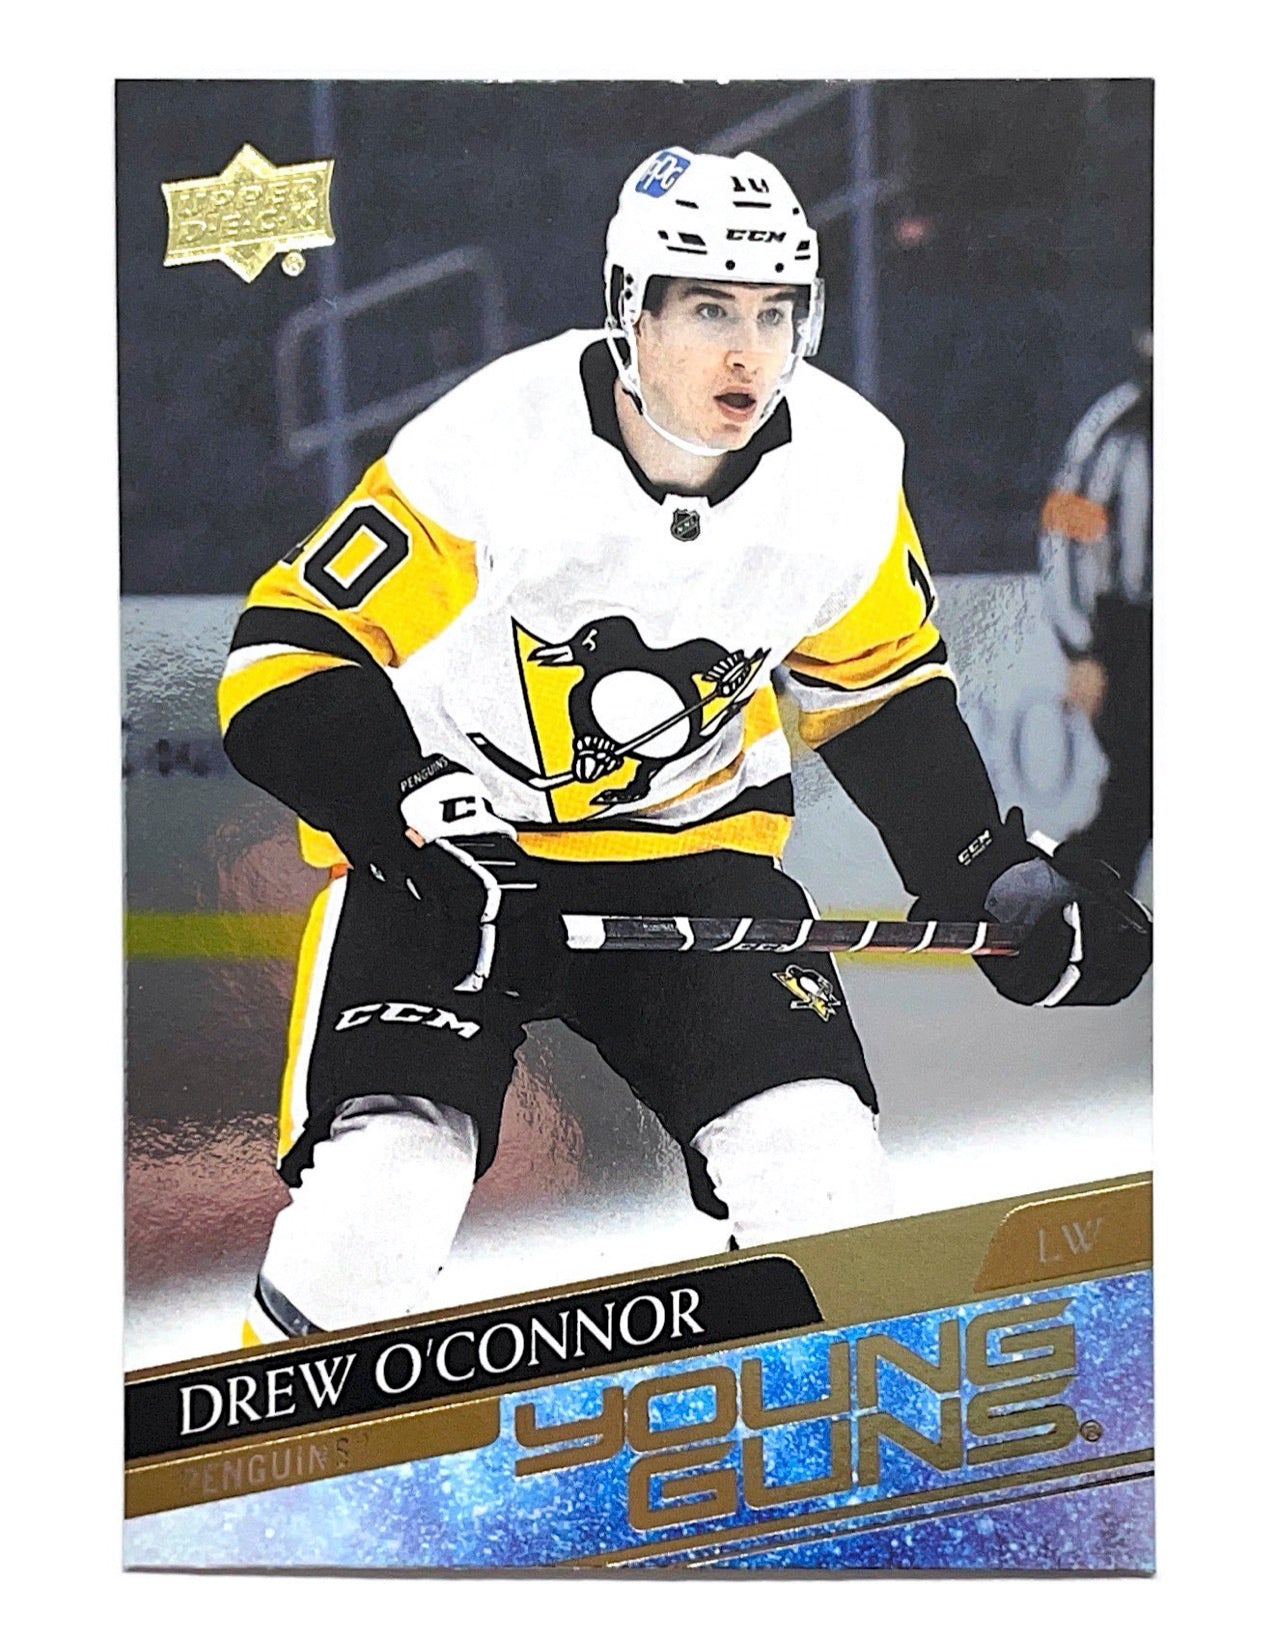 Drew O'Connor 2020-21 Upper Deck Extended Series Young Guns Silver Foil #728